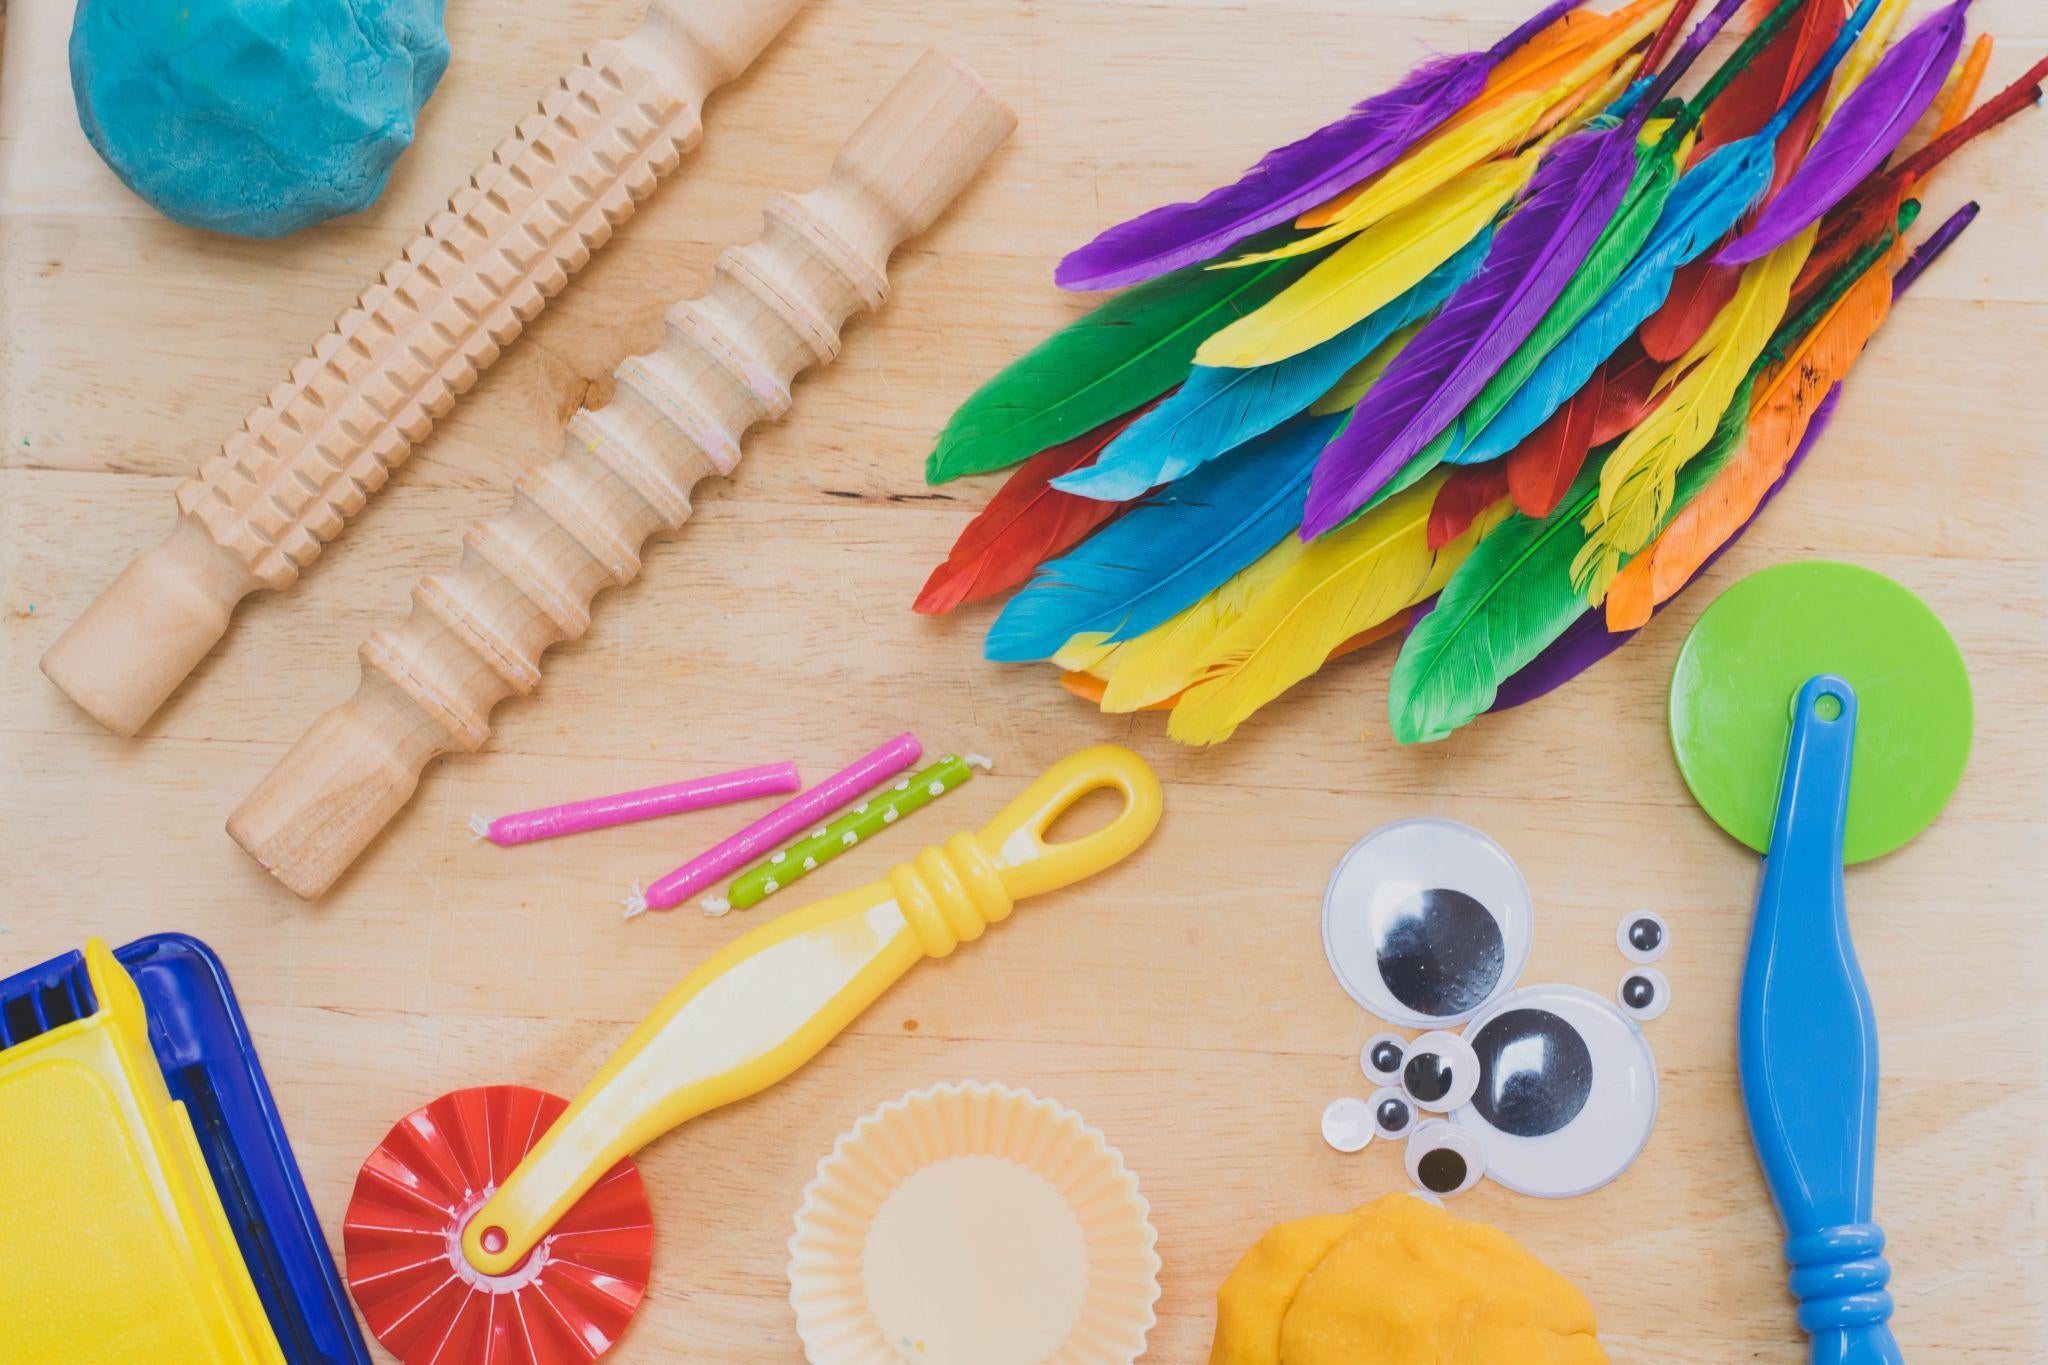 Product Image of the Playdough Tools